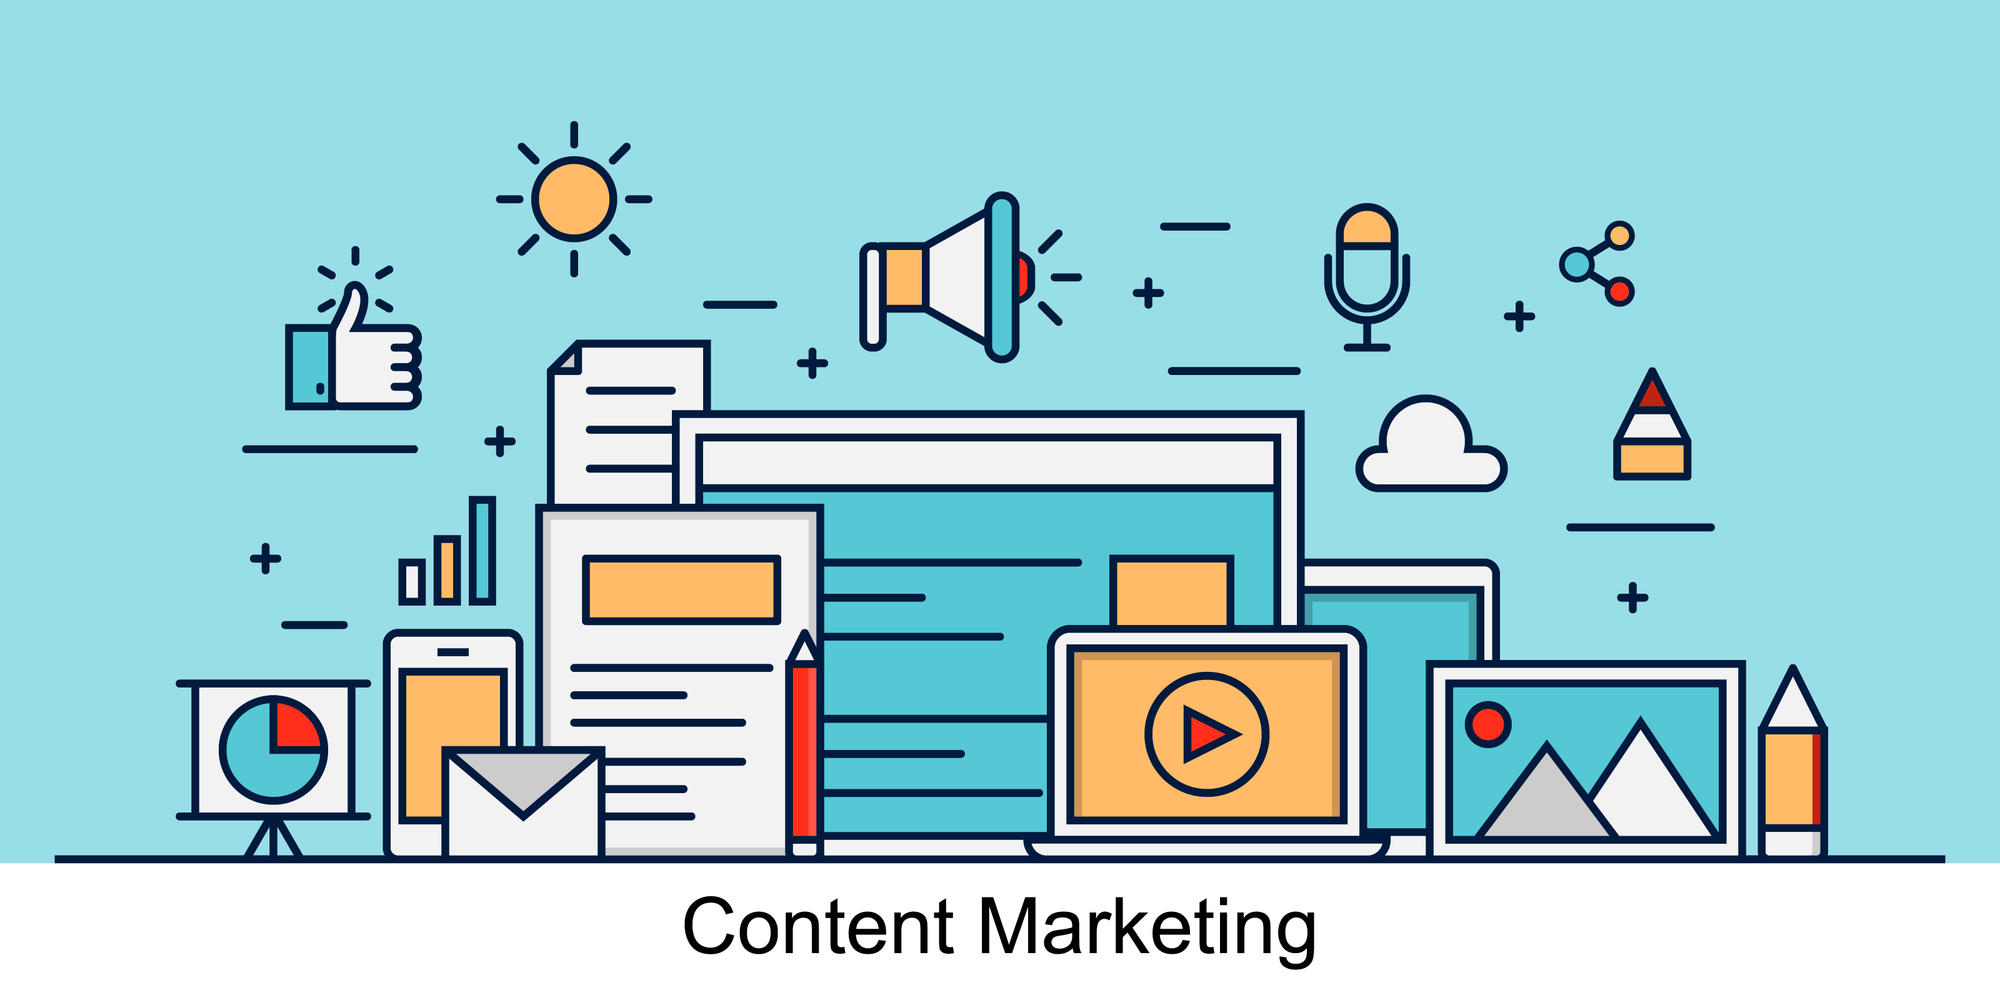 3 Easy Ways to Organize Your Content Today